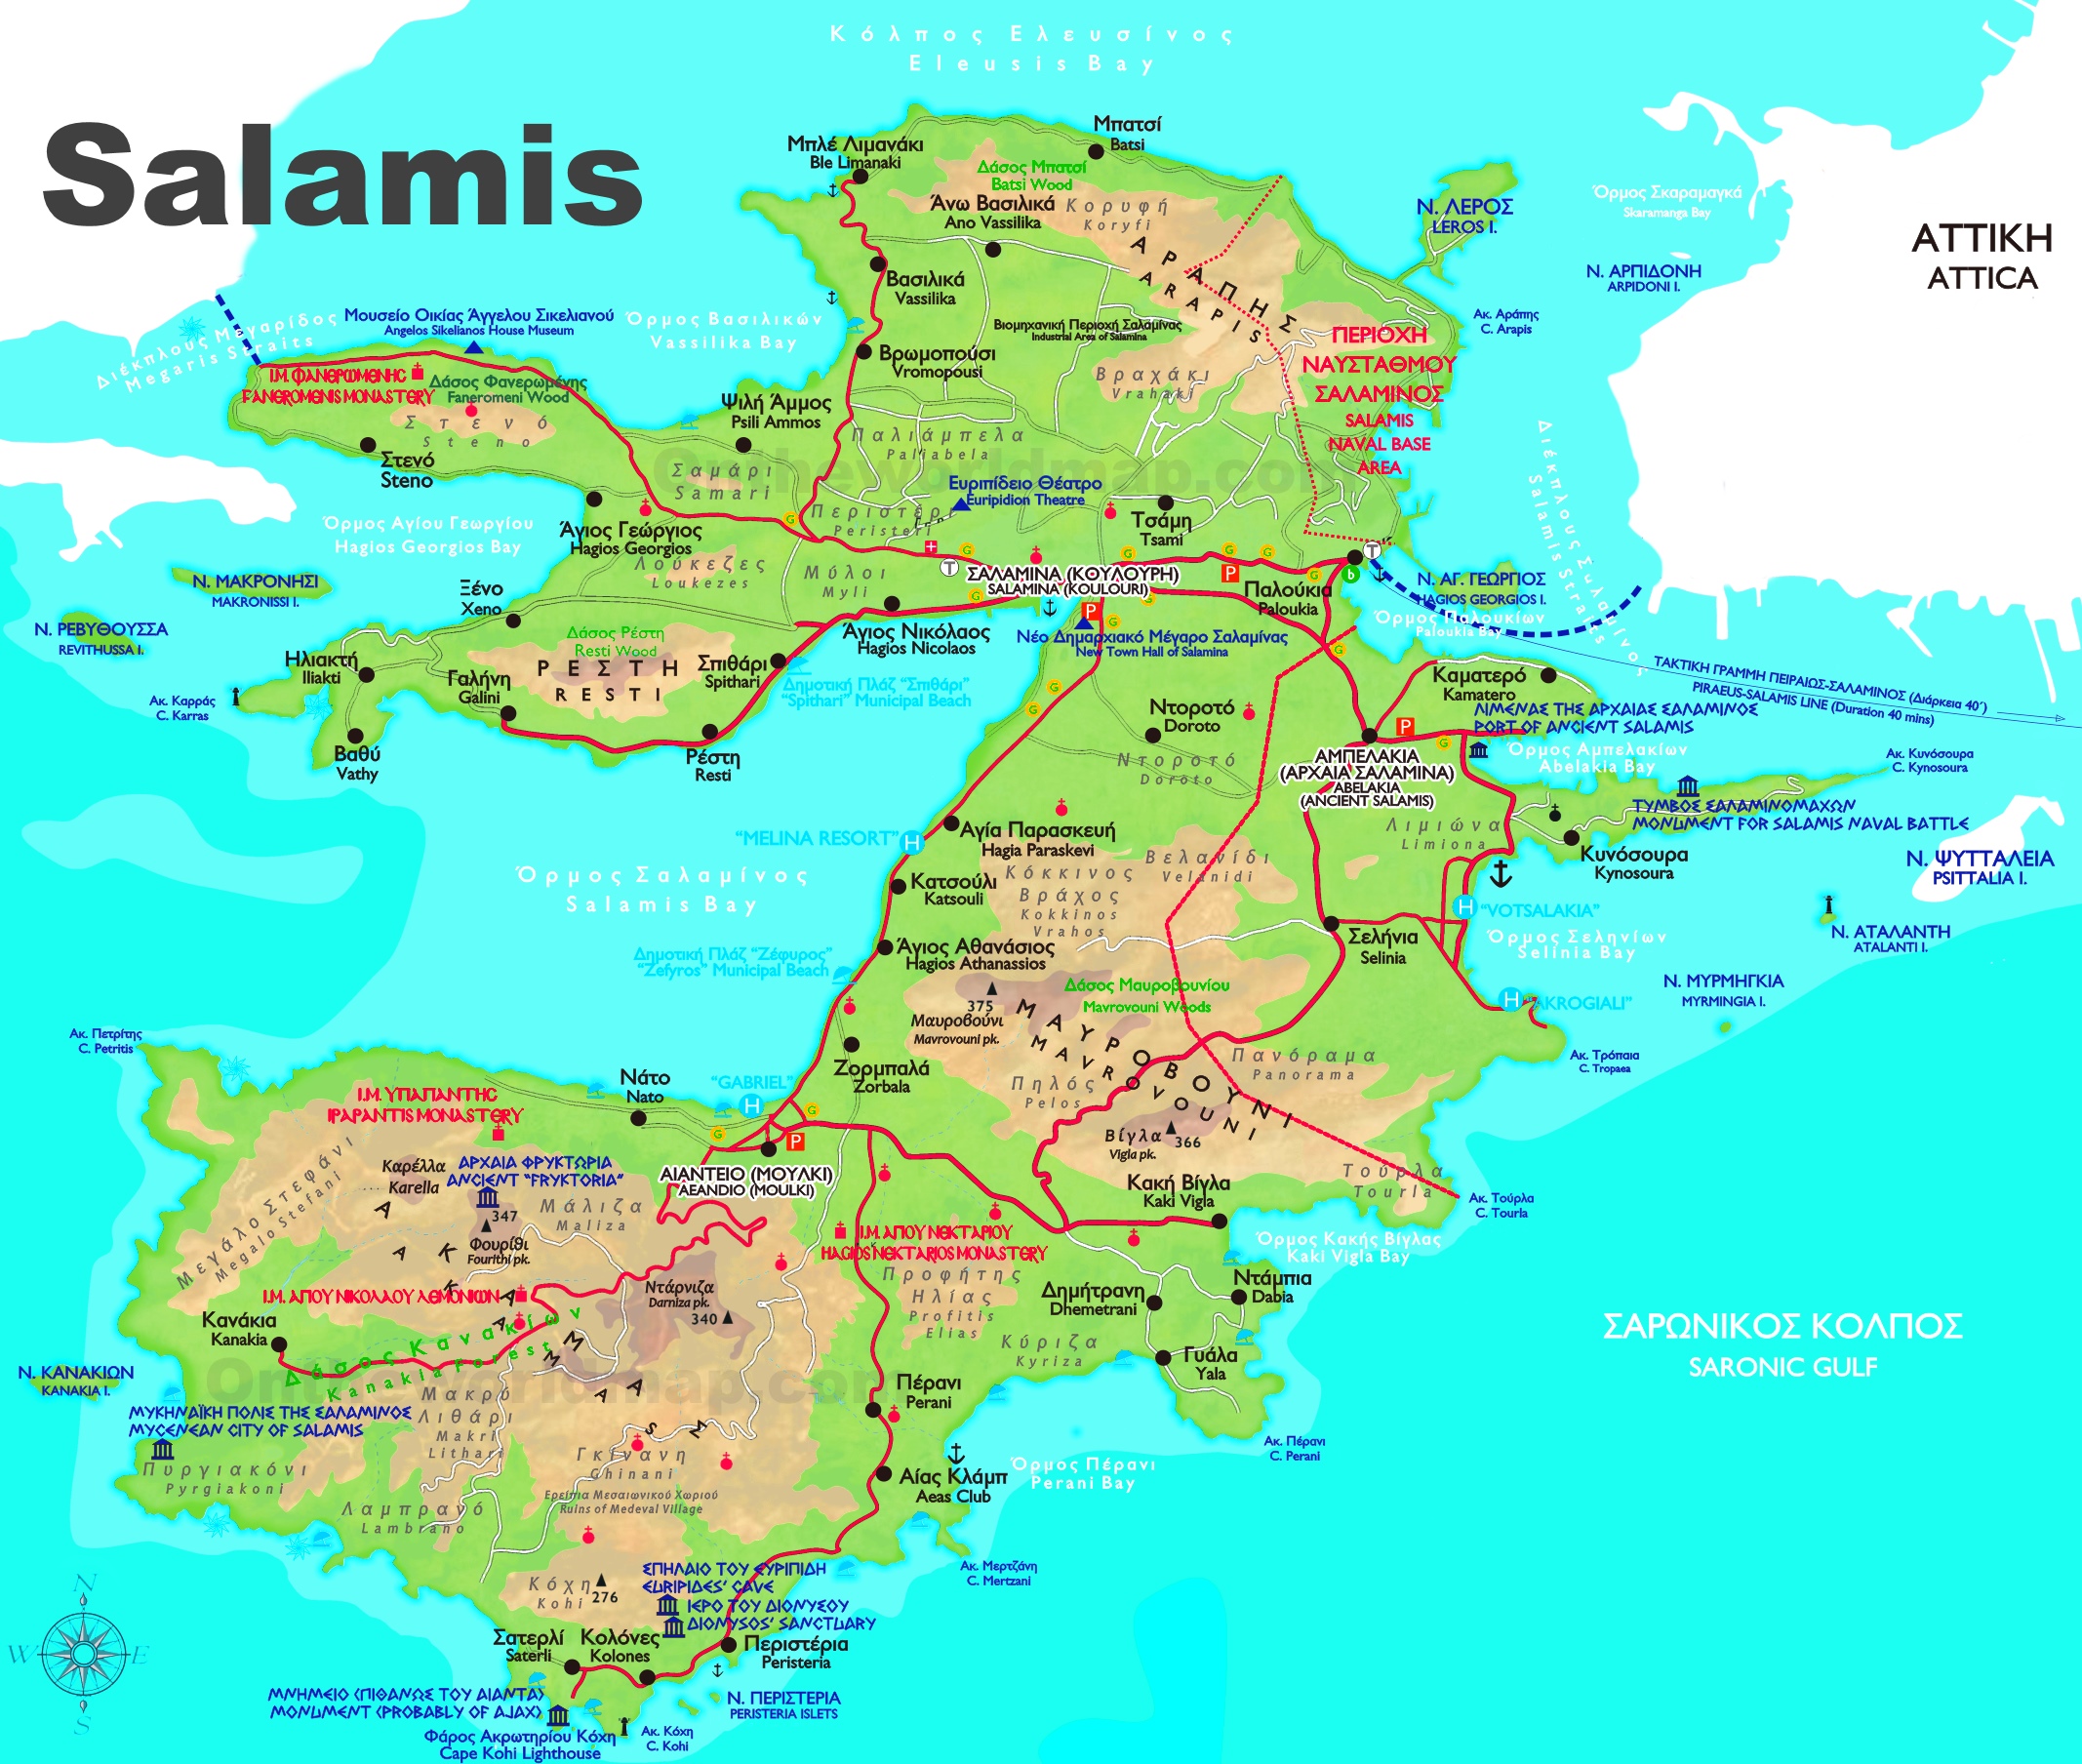 In 306 Bc Salamis Cyprus Wikipedia Paul At Paphos Of Cyprus